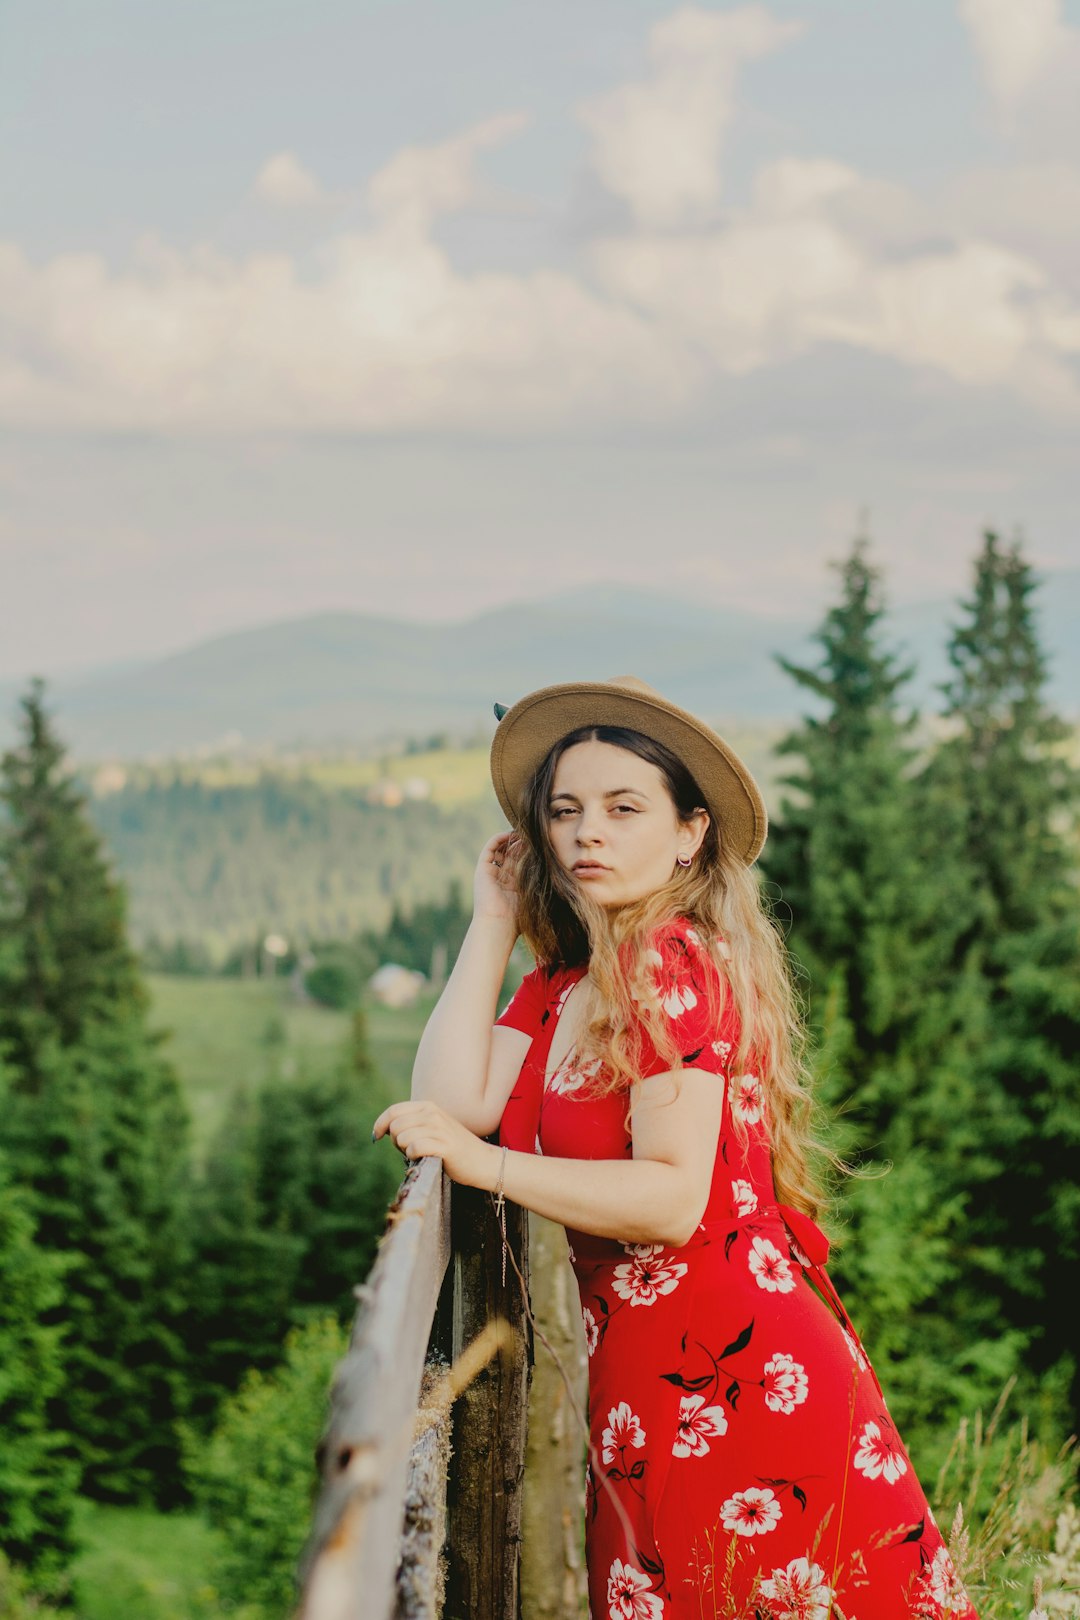 woman in red and white floral sleeveless dress wearing brown hat standing on green grass field